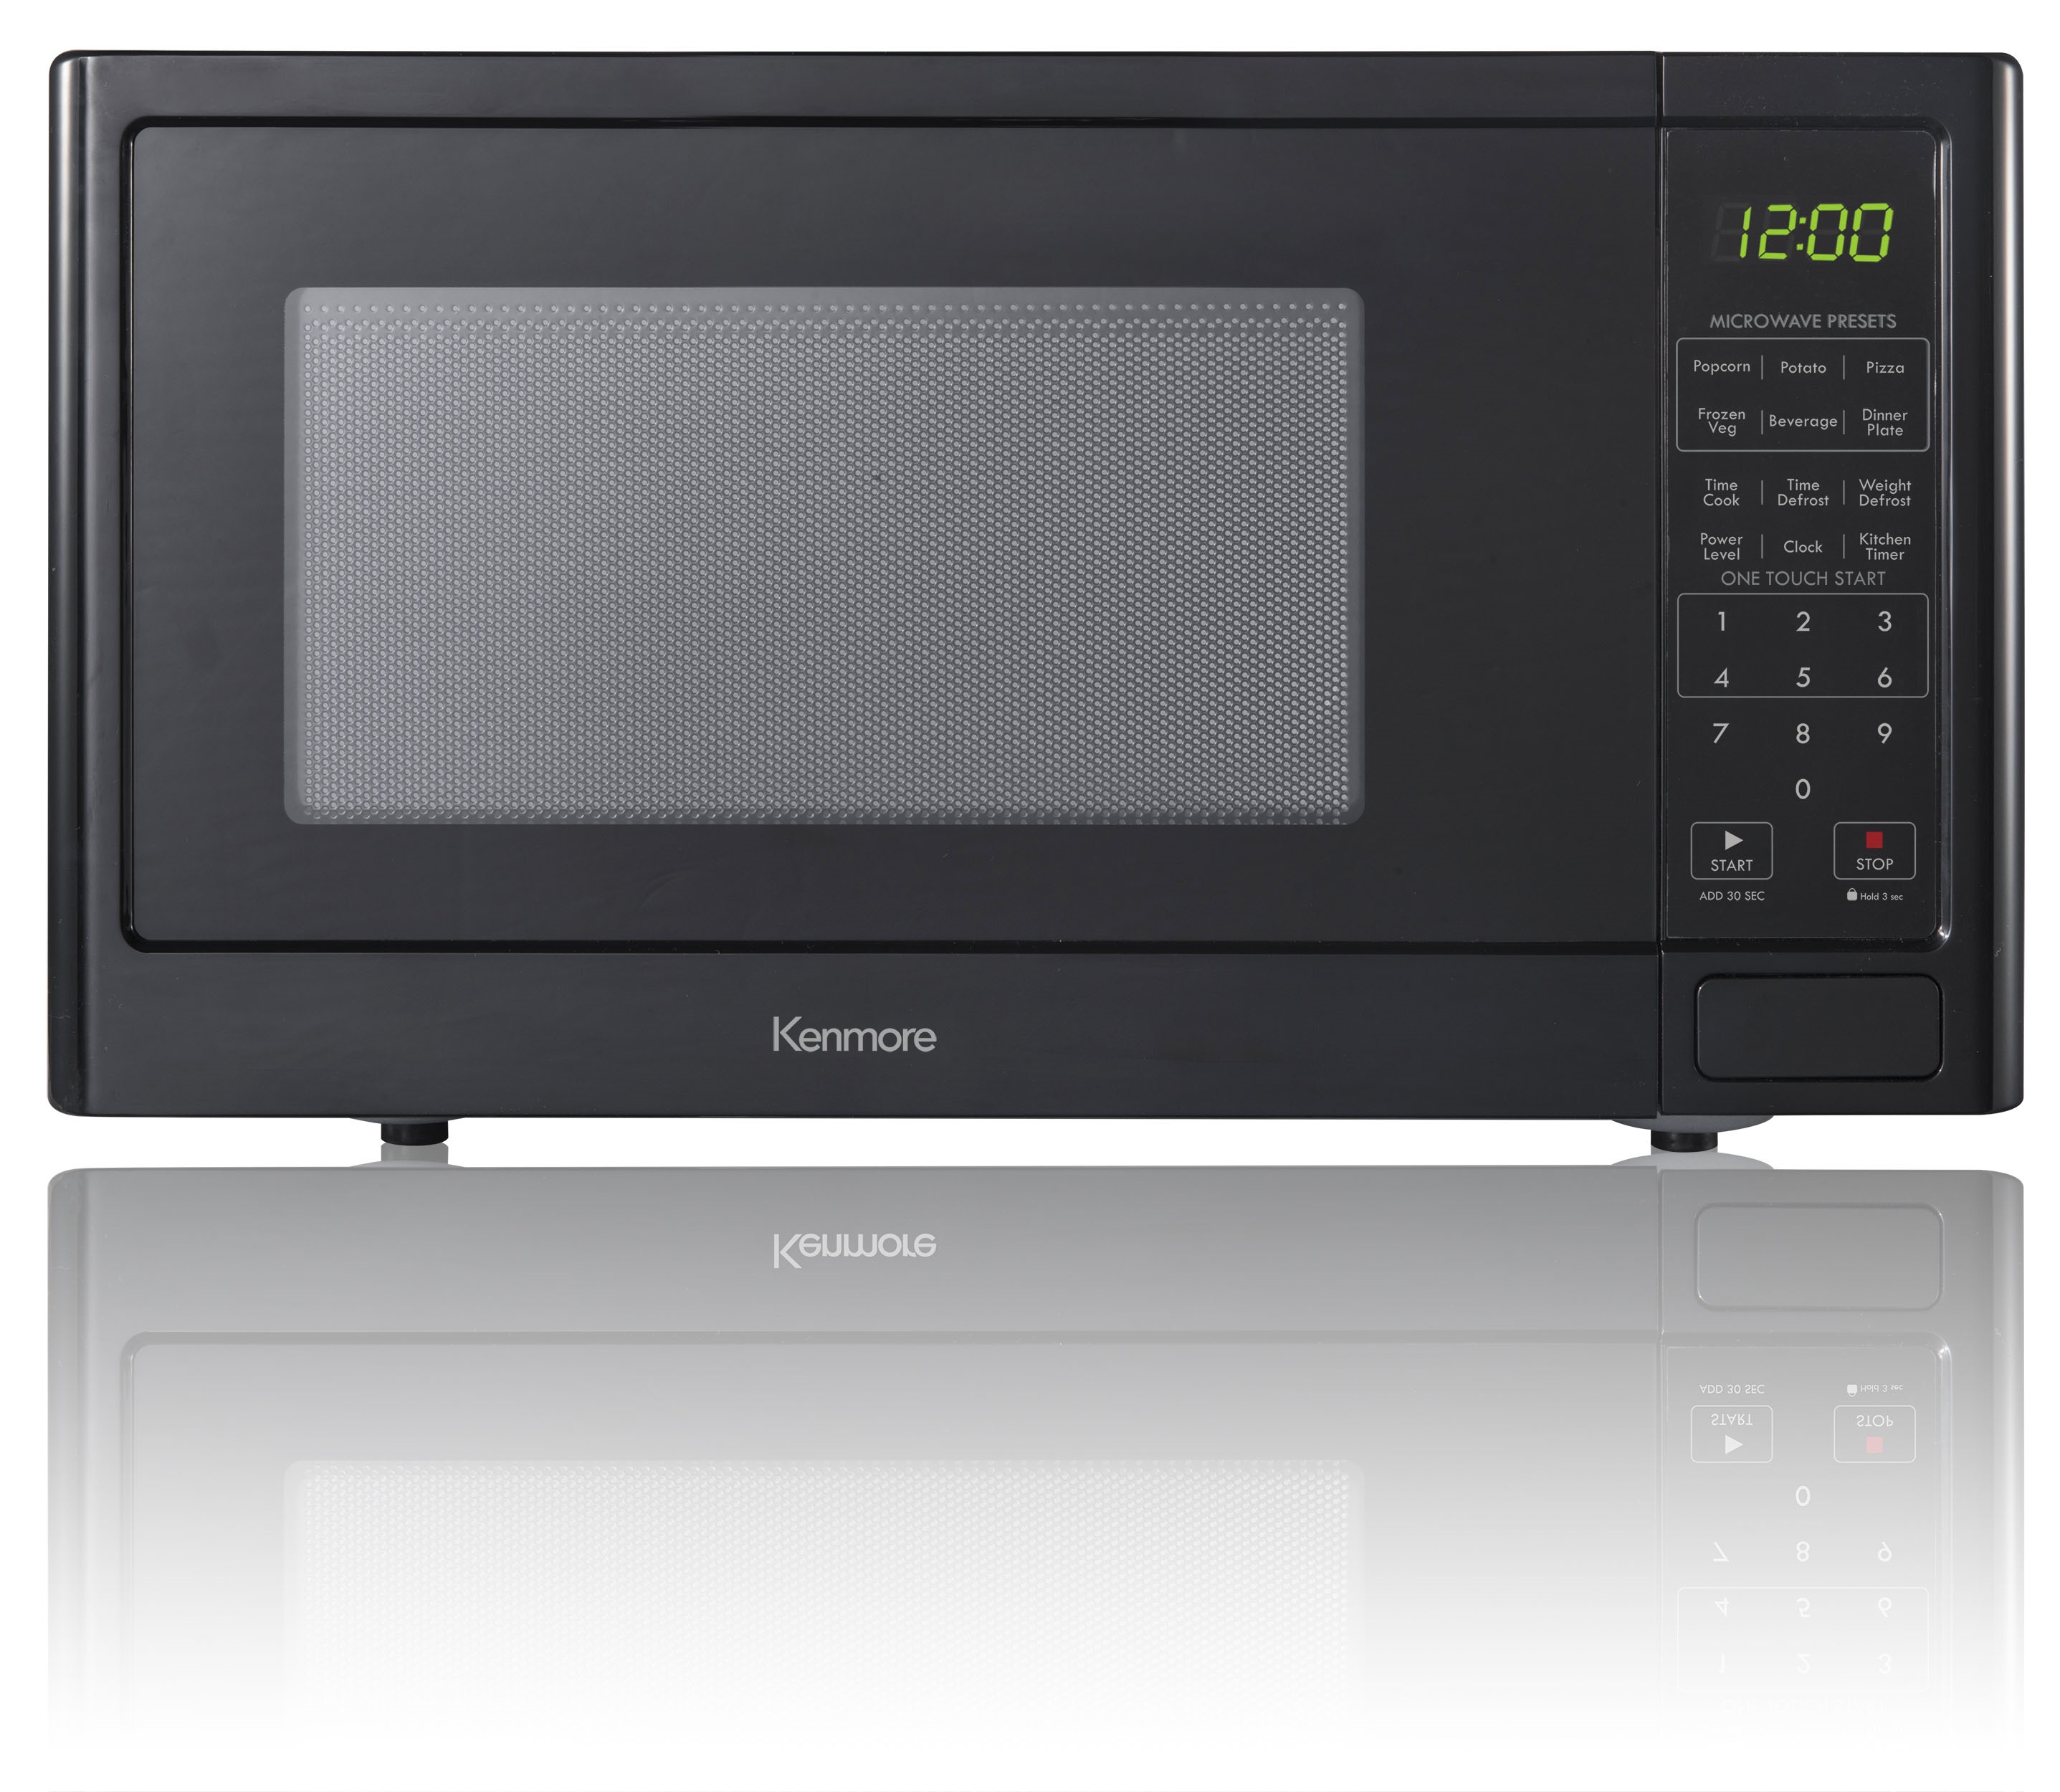 Kenmore 73779 0.9 cu. ft. Countertop Microwave Oven - Black | Shop Your